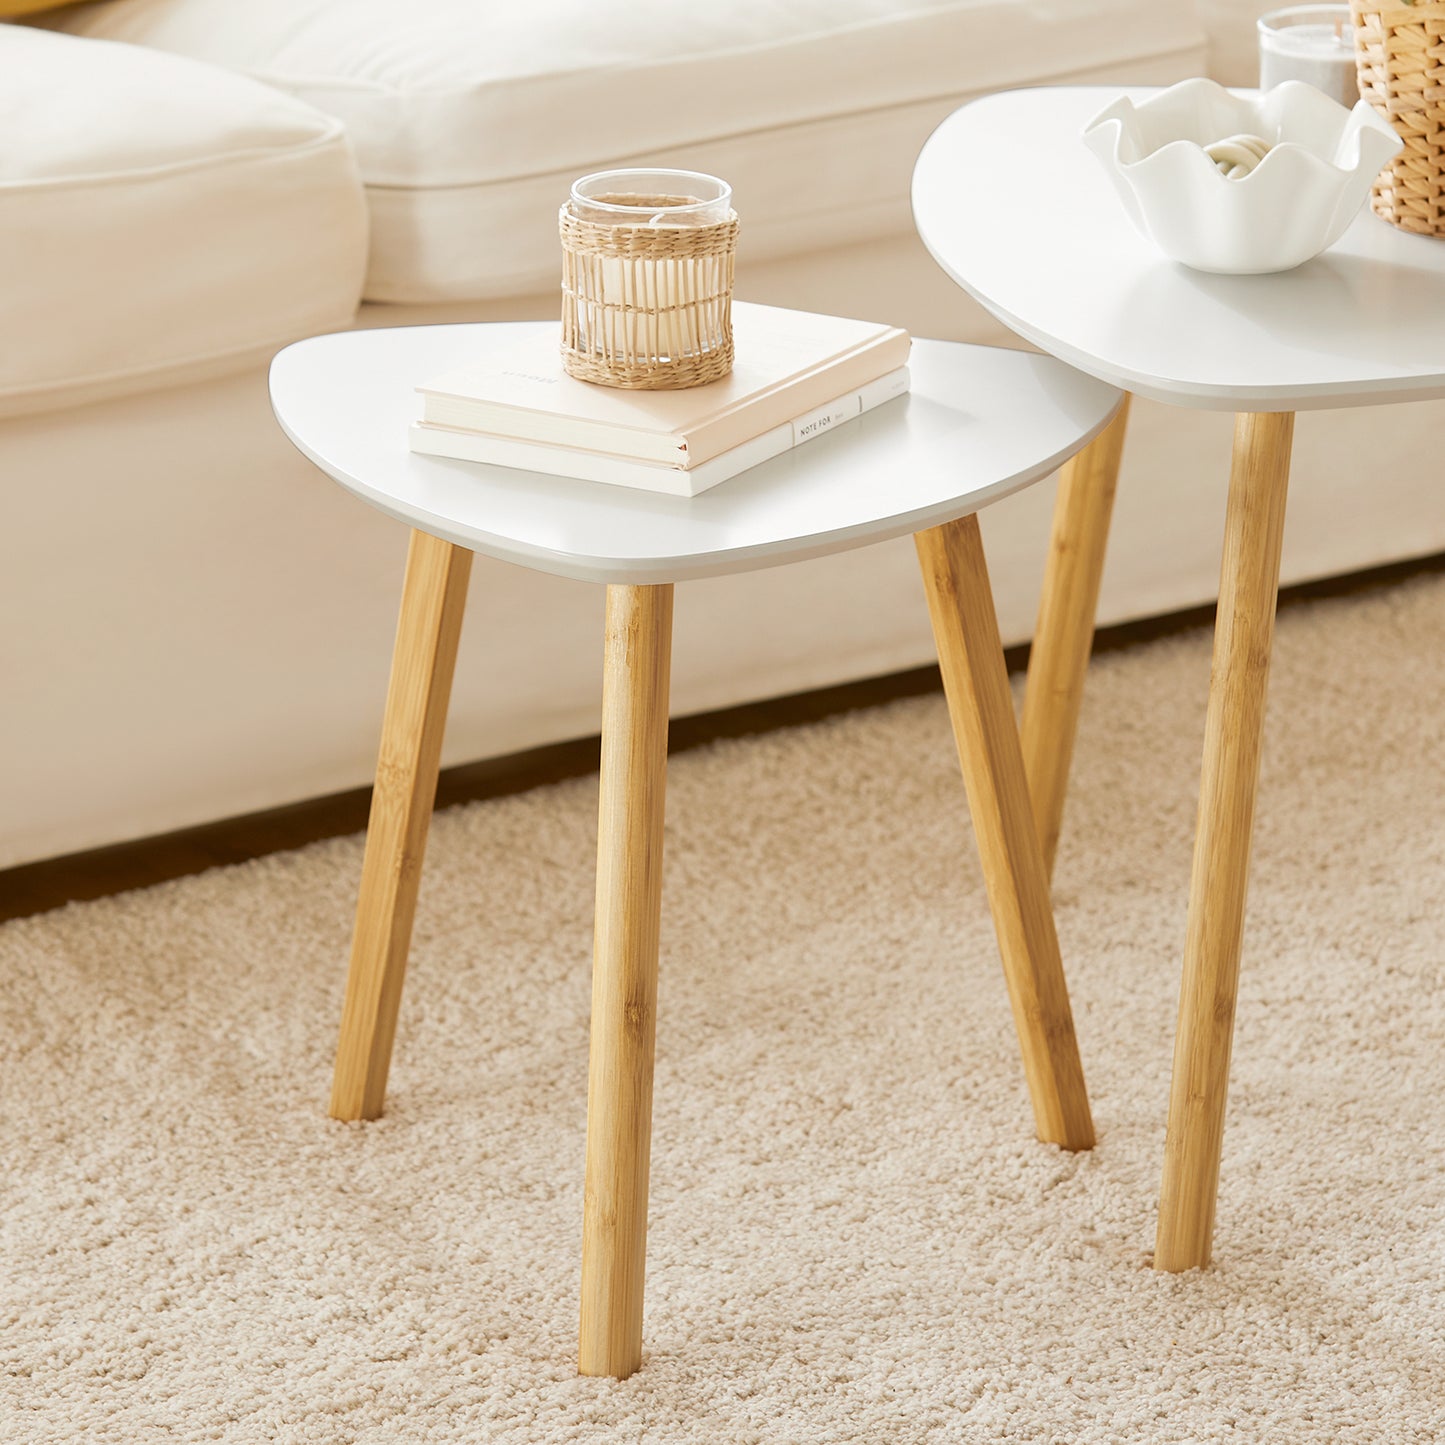 SoBuy Nesting Tables, Set of 2 Side Tables, White Coffee Tables, End Tables